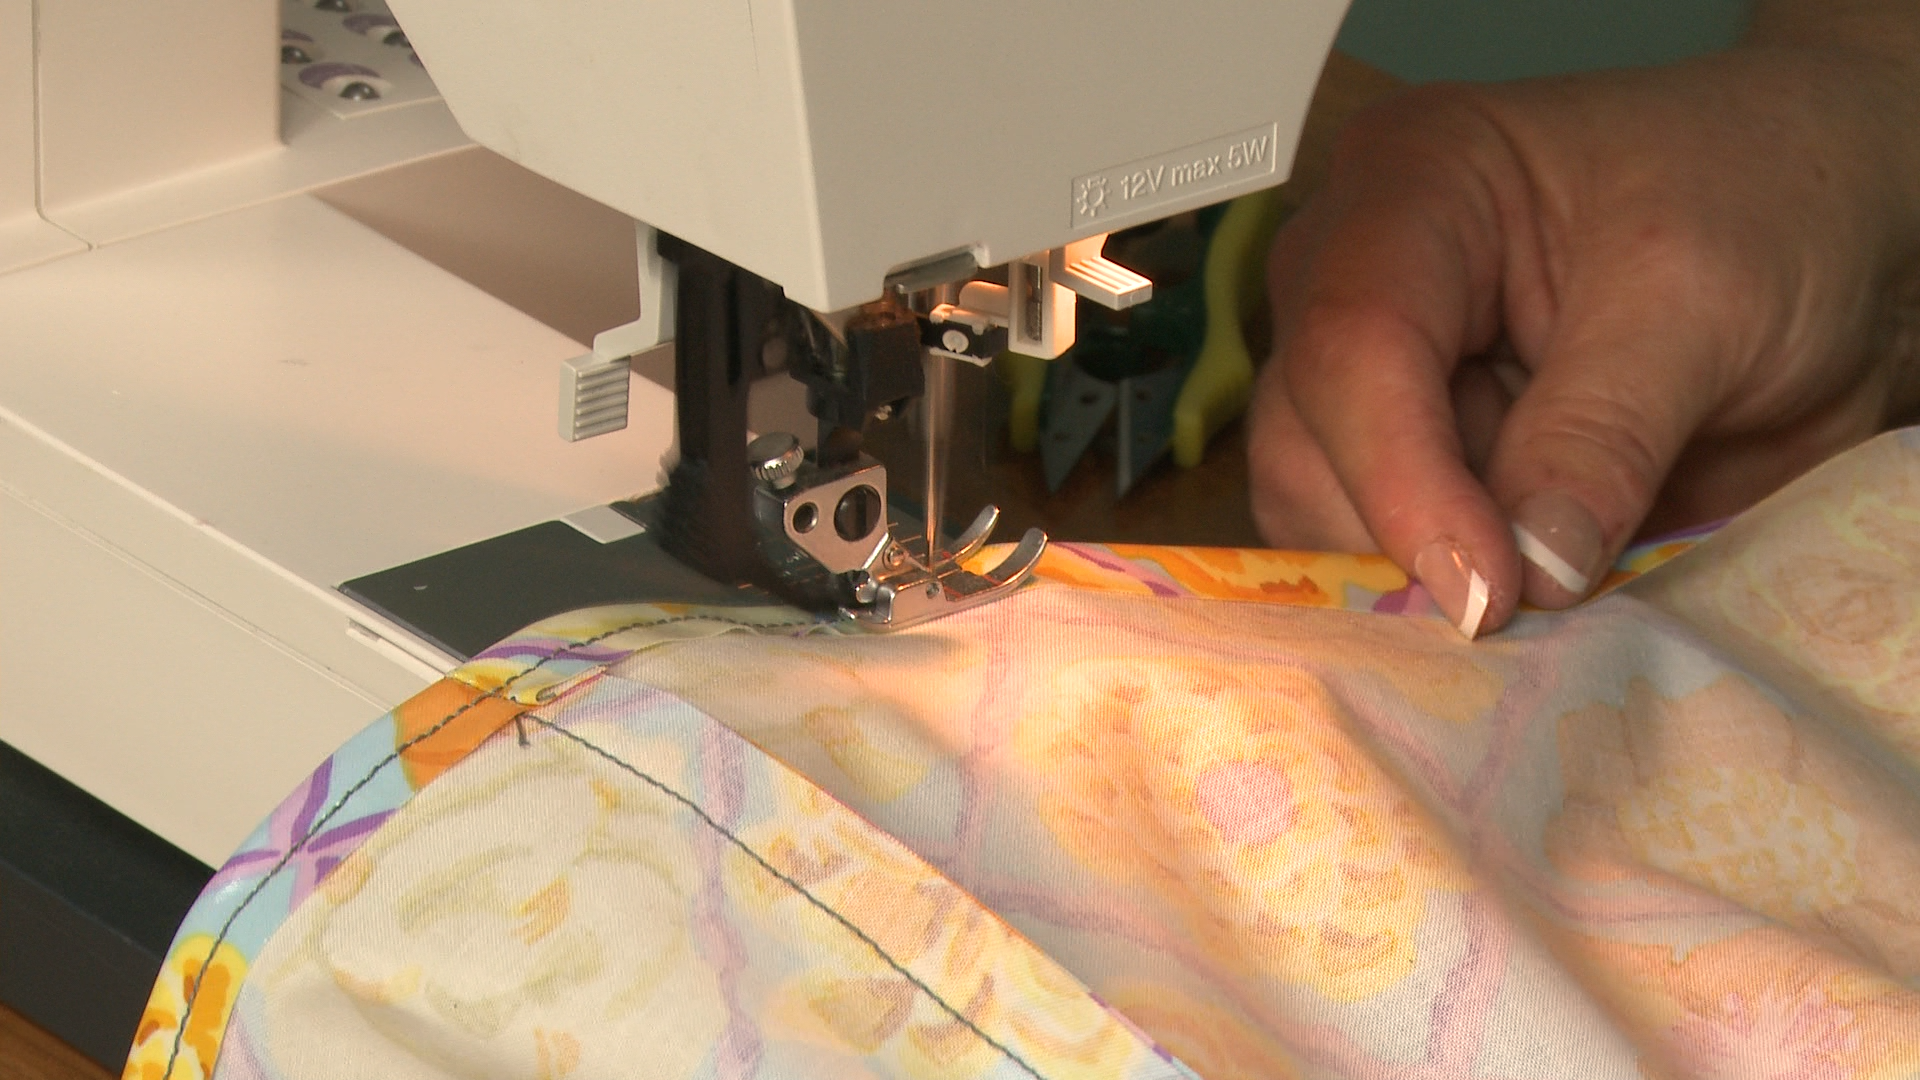 Sewing with laminated cotton